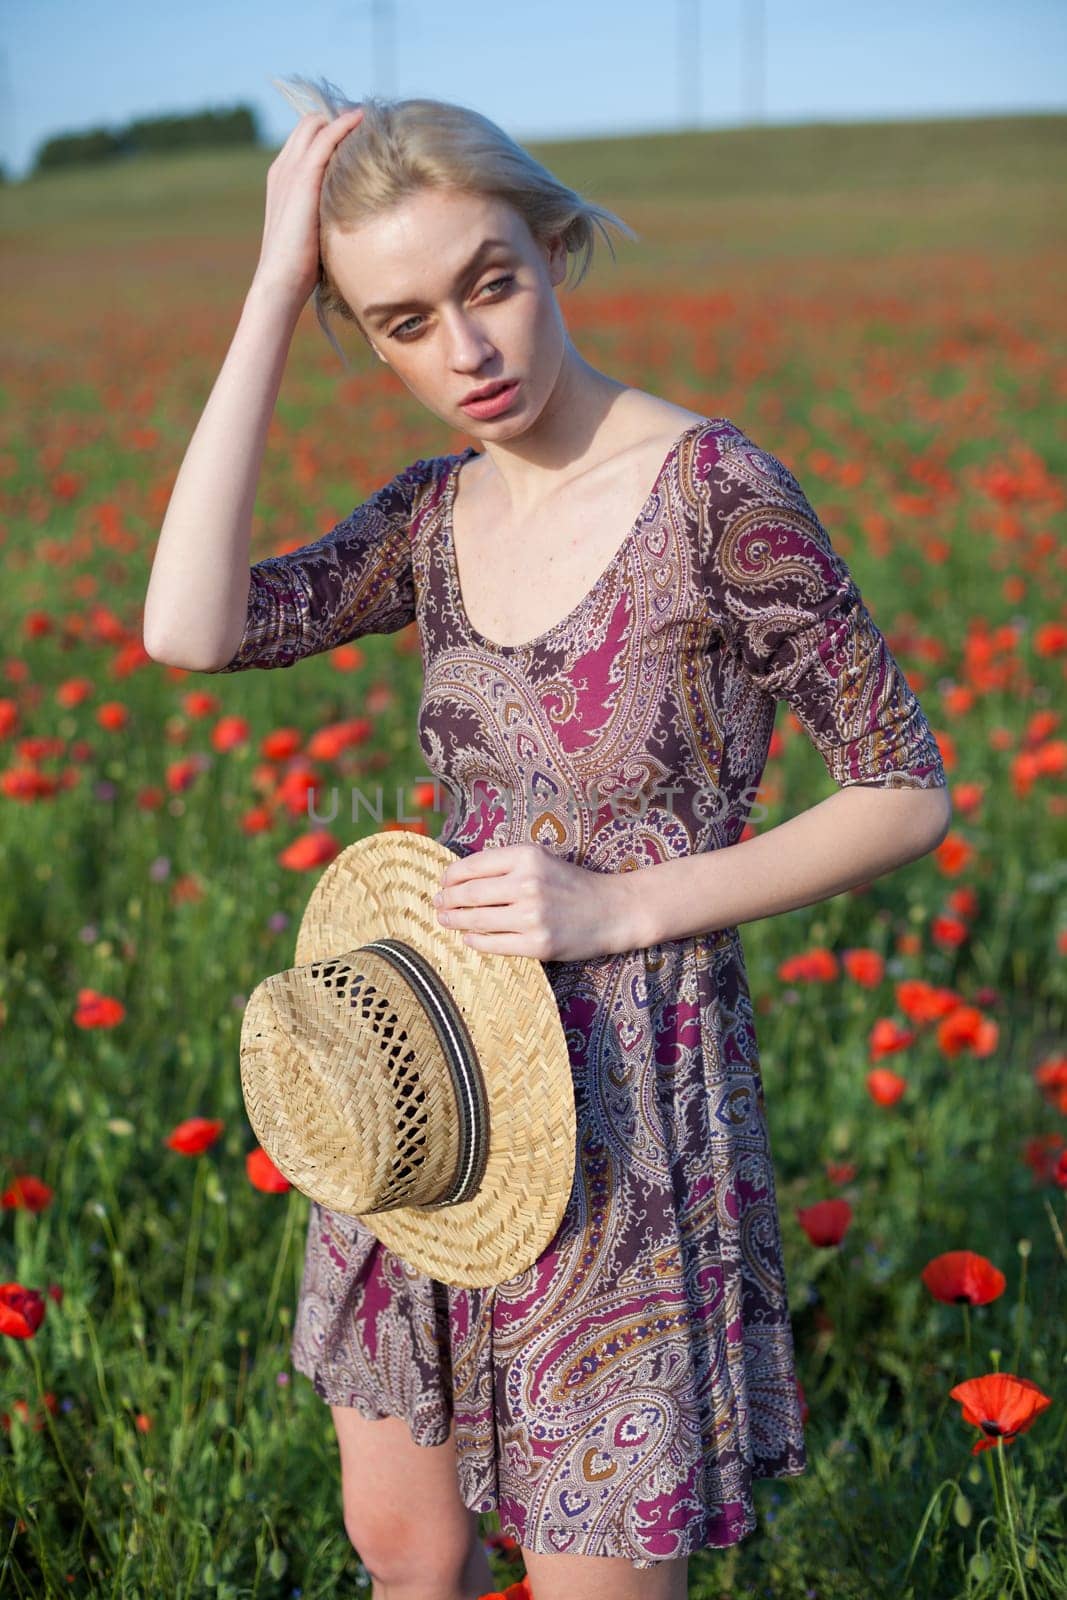 portrait of a woman in a dress in a field of red poppies